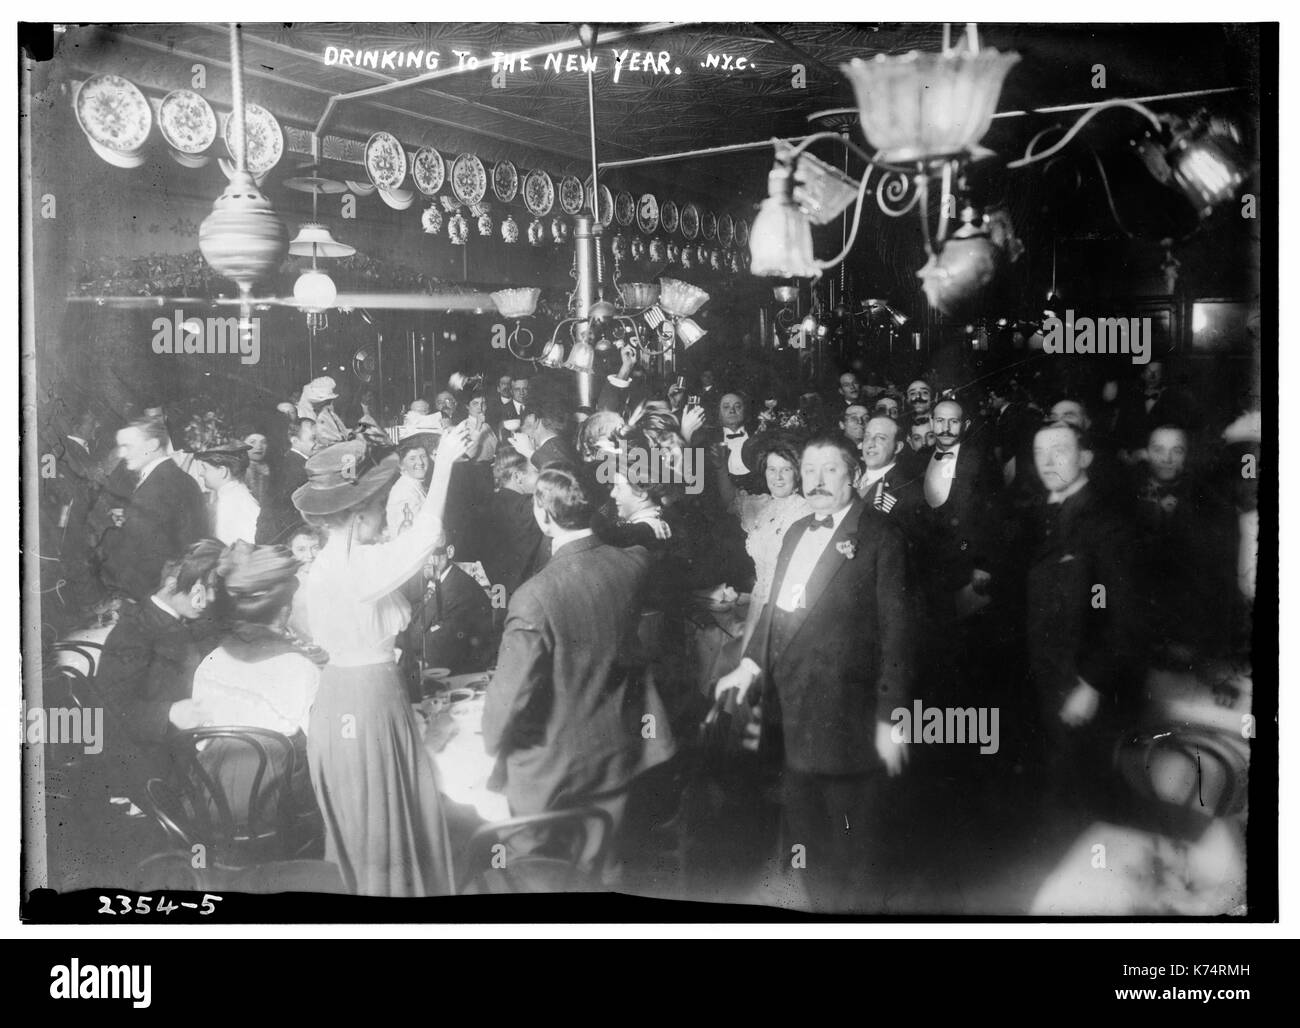 1911-1915 - Well-dressed merry-makers drink to the New Year. New York, circa 1911. Stock Photo